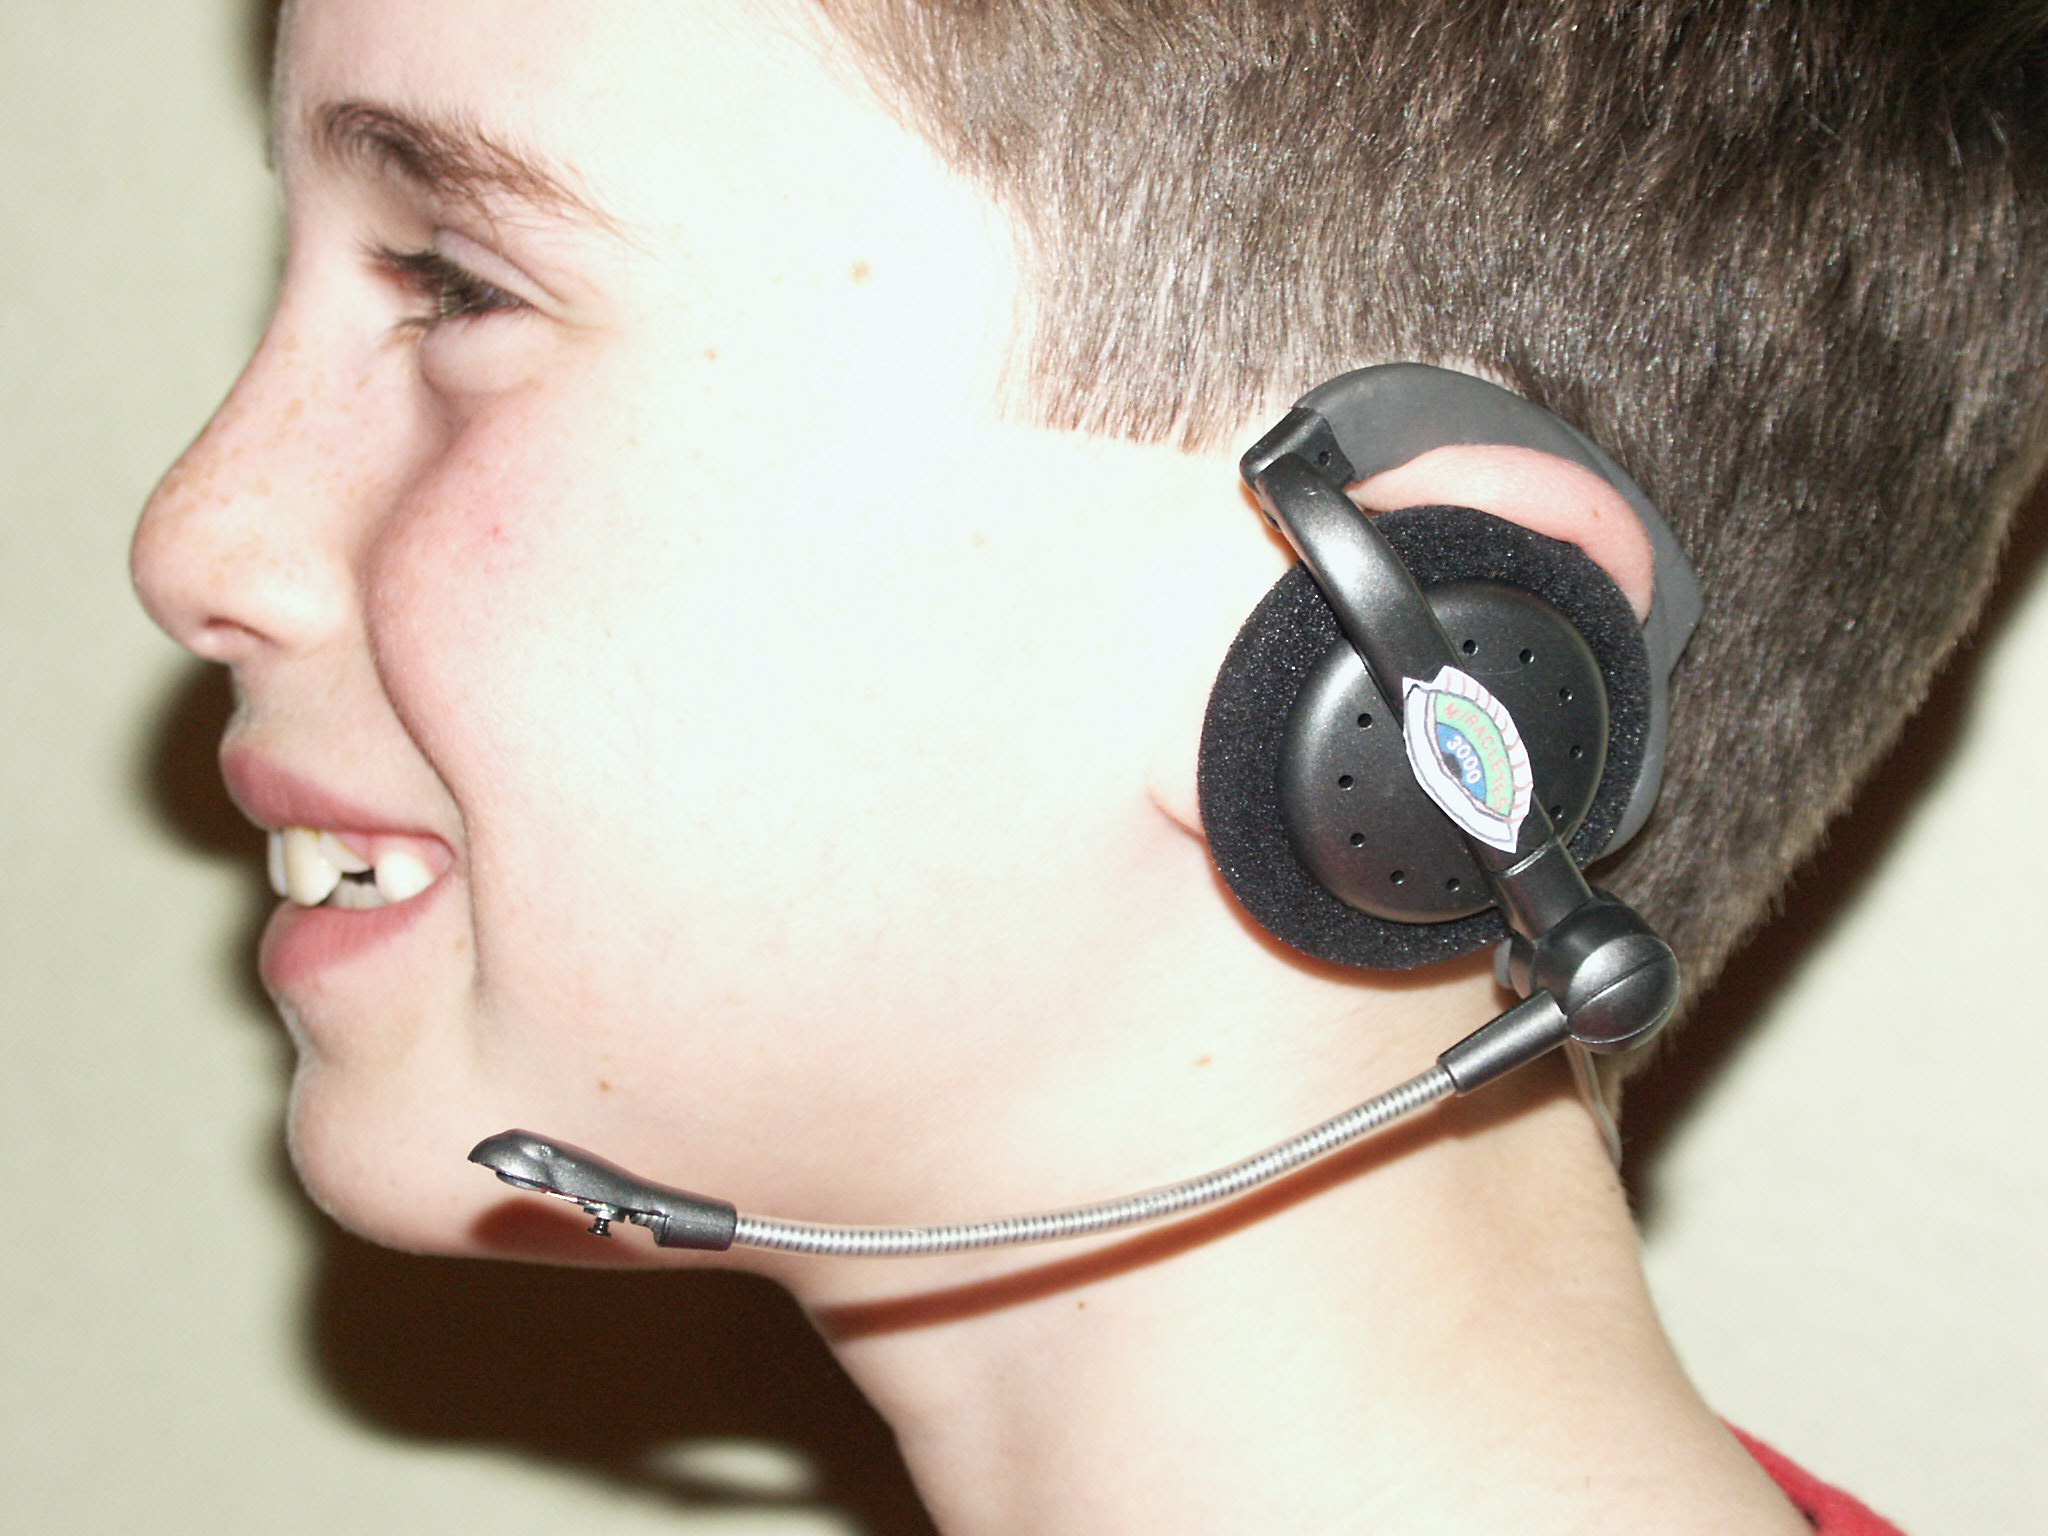 Photo of earpiece and microphone on user's head.